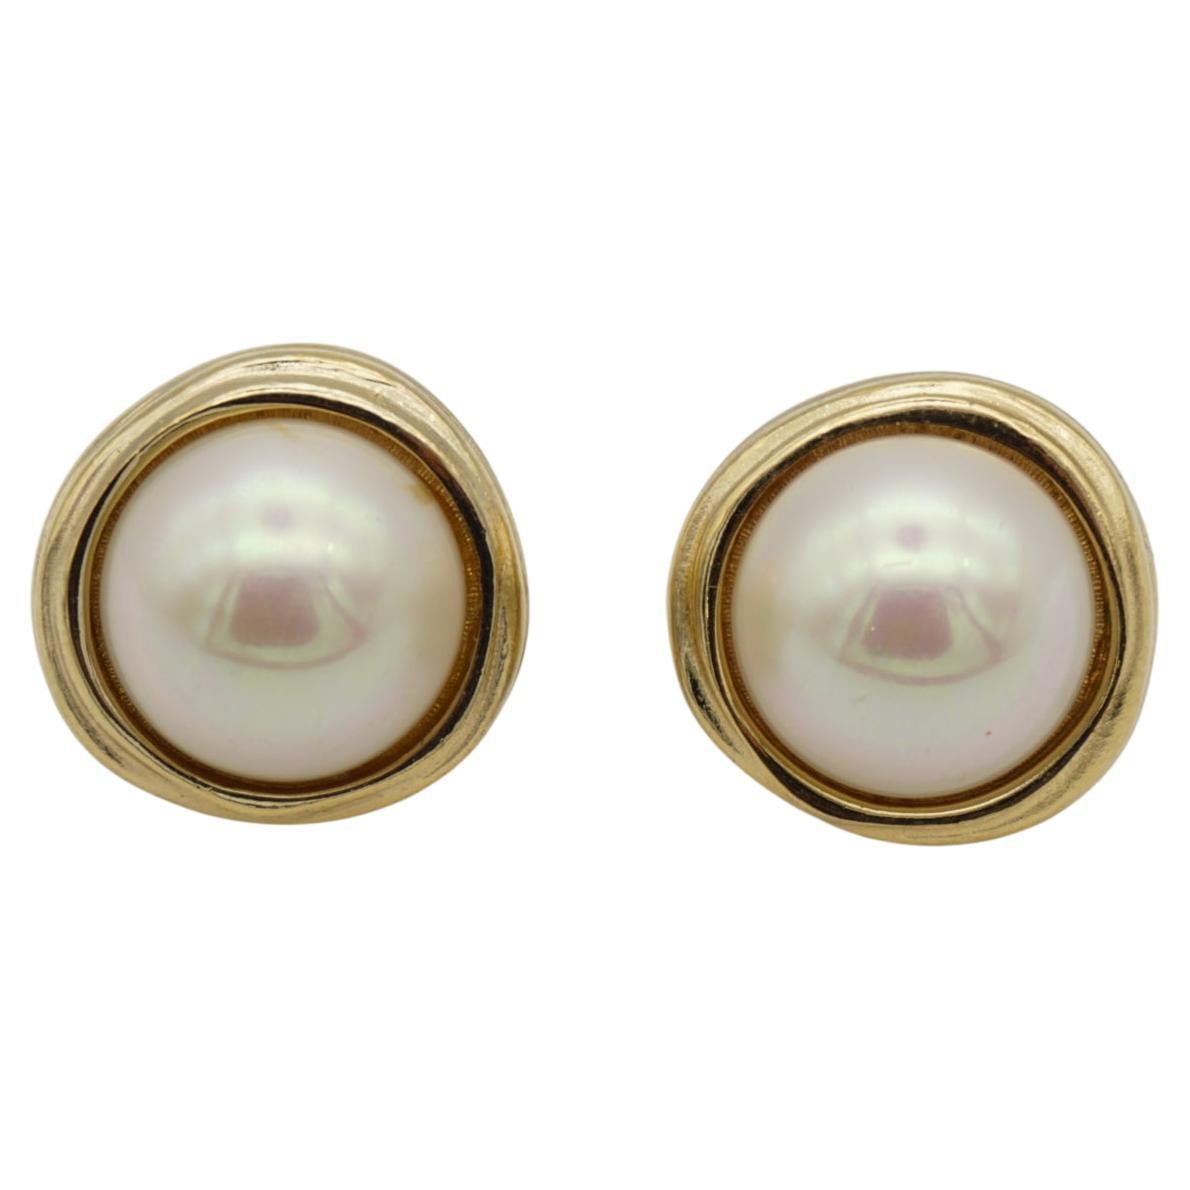 Christian Dior Vintage 1980s Irregular Large Round Faux Pearl Pierced Earrings